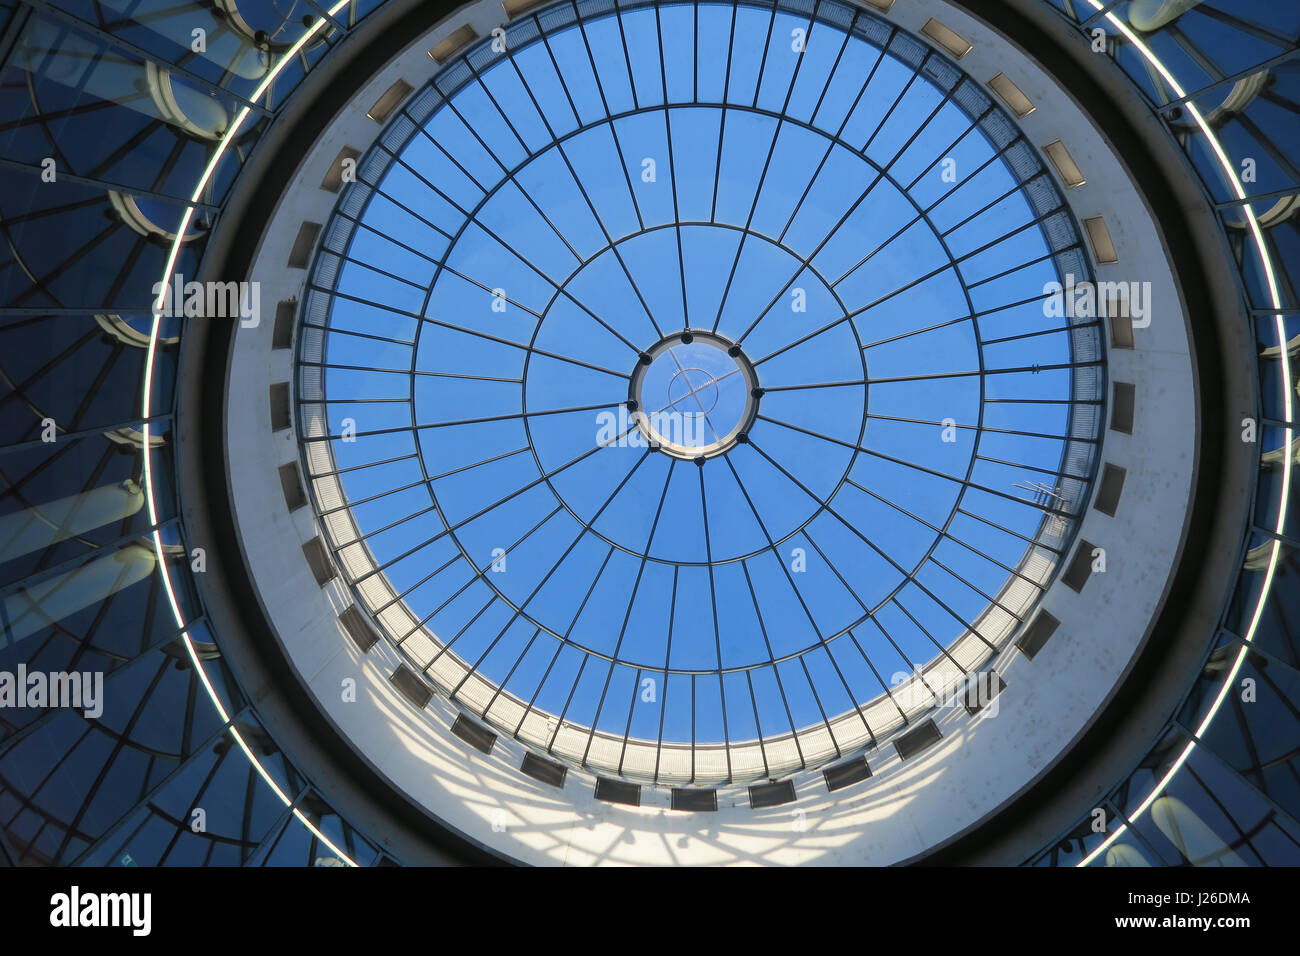 Glass dome ceiling at the Schirn Kunsthalle Museum of Modern Art, Frankfurt am Main, Germany, Europe Stock Photo